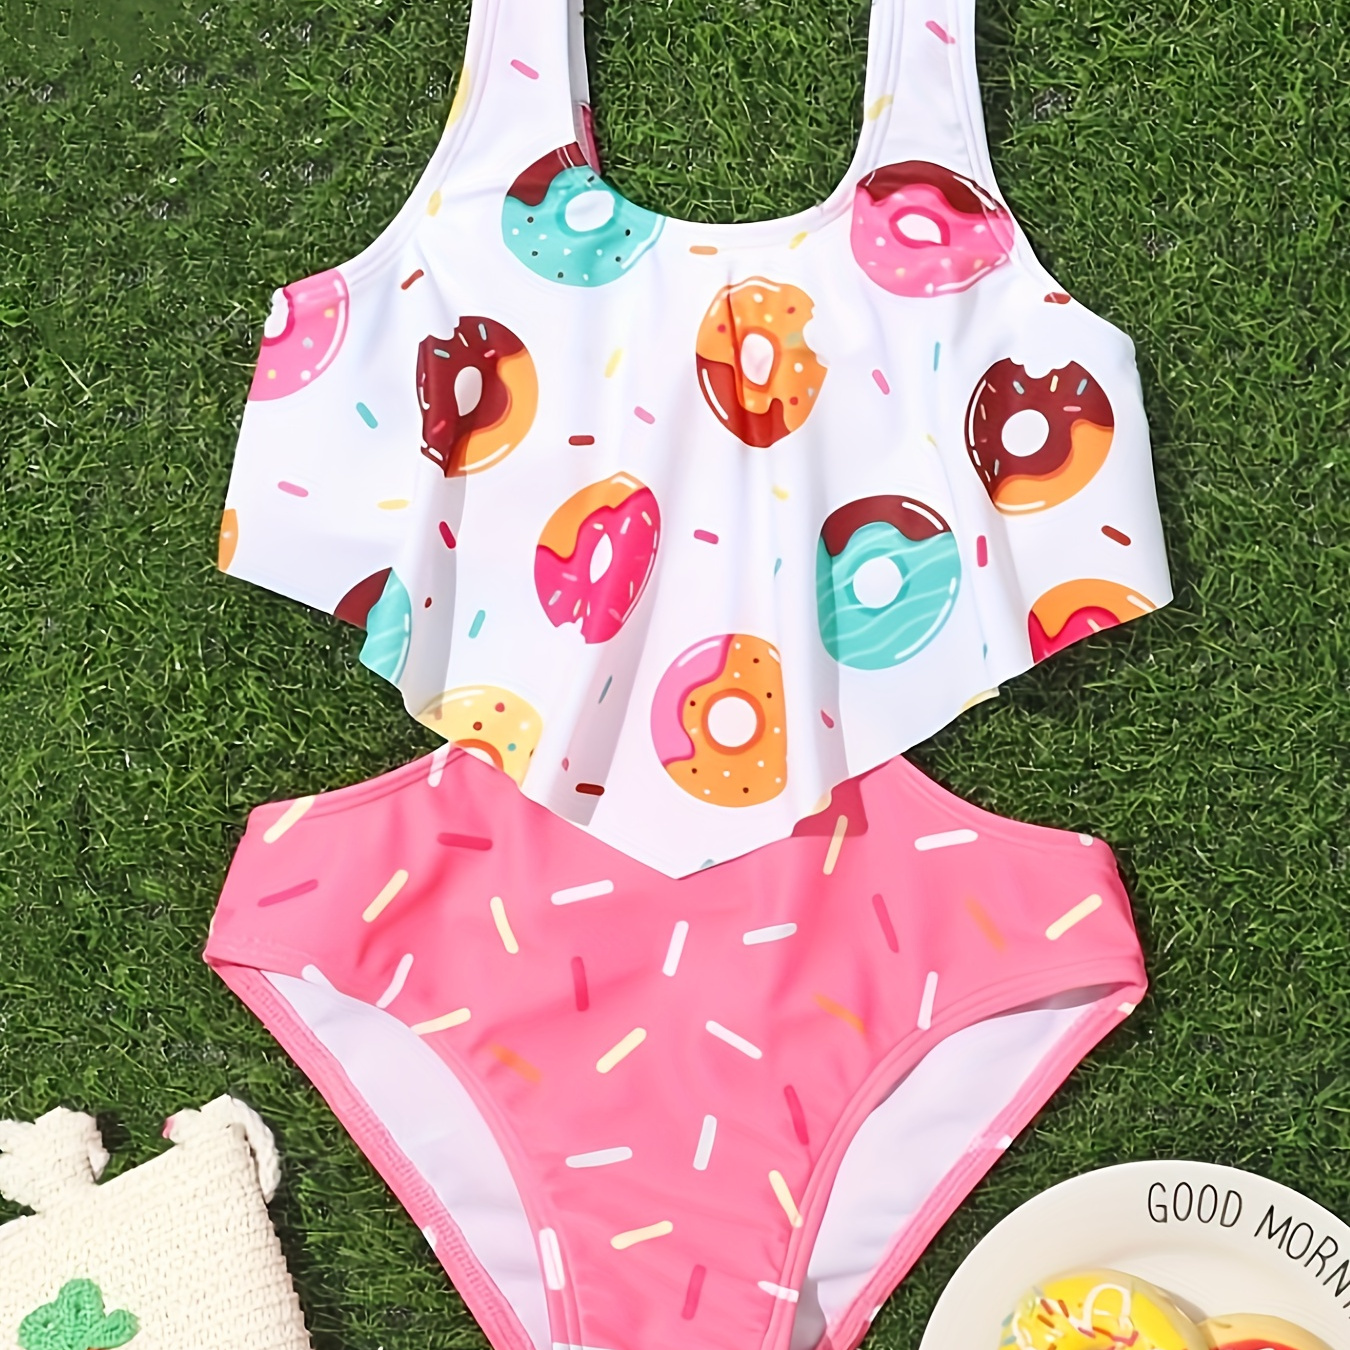 

Yummy Doughnut Graphic 1-piece Swimsuit Girls Bathing Suit Summer Clothes Gift